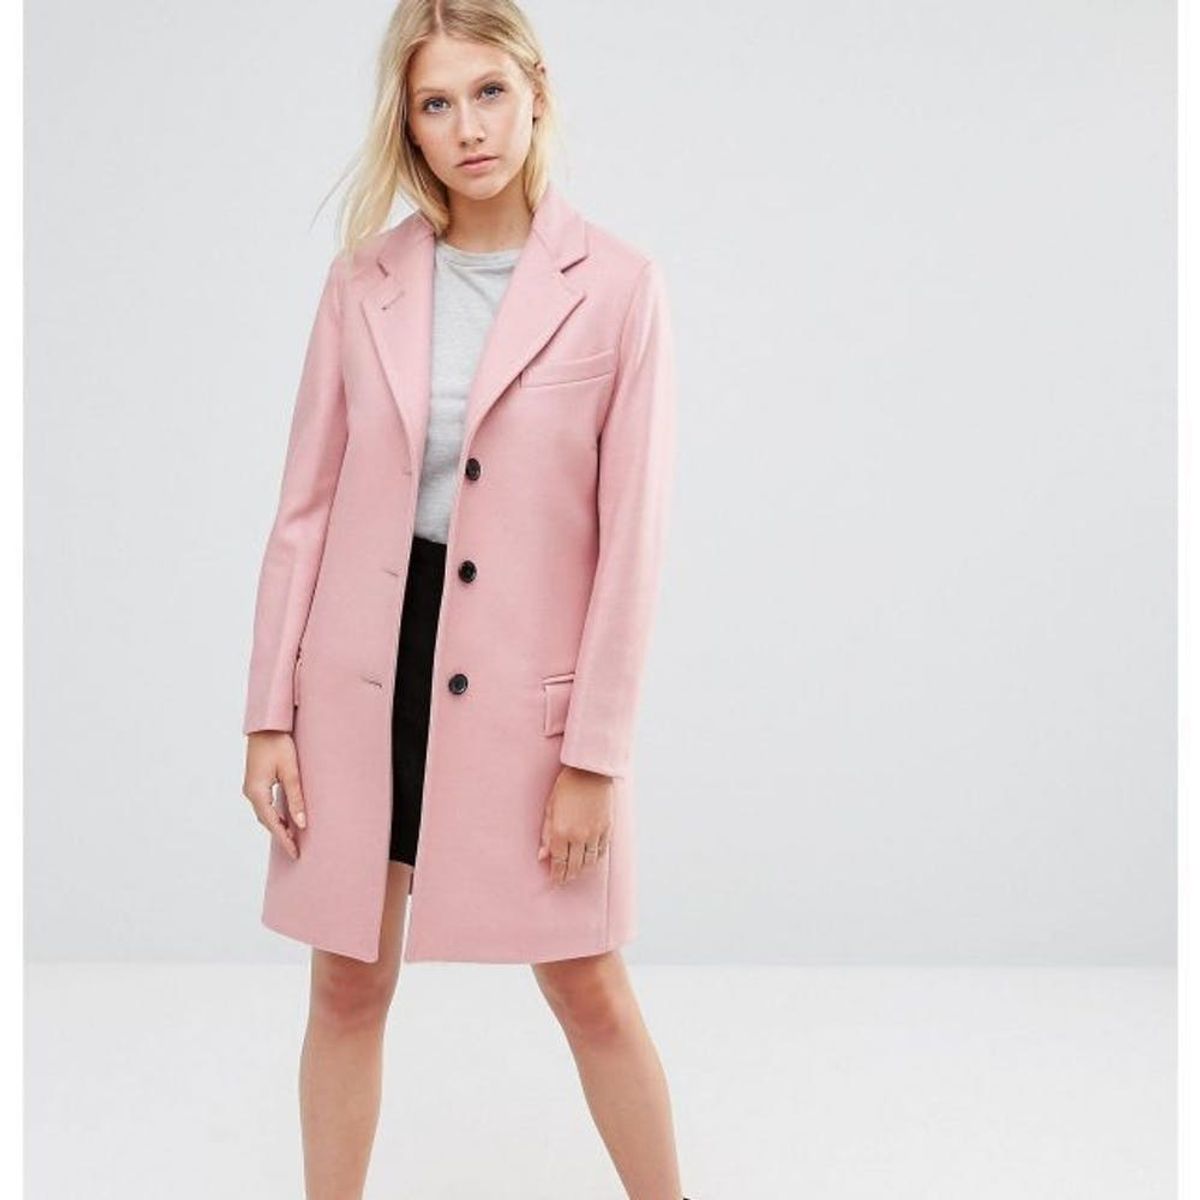 8 Reasons Why We’re Crushing on Bubblegum Pink Coats RN - Brit + Co